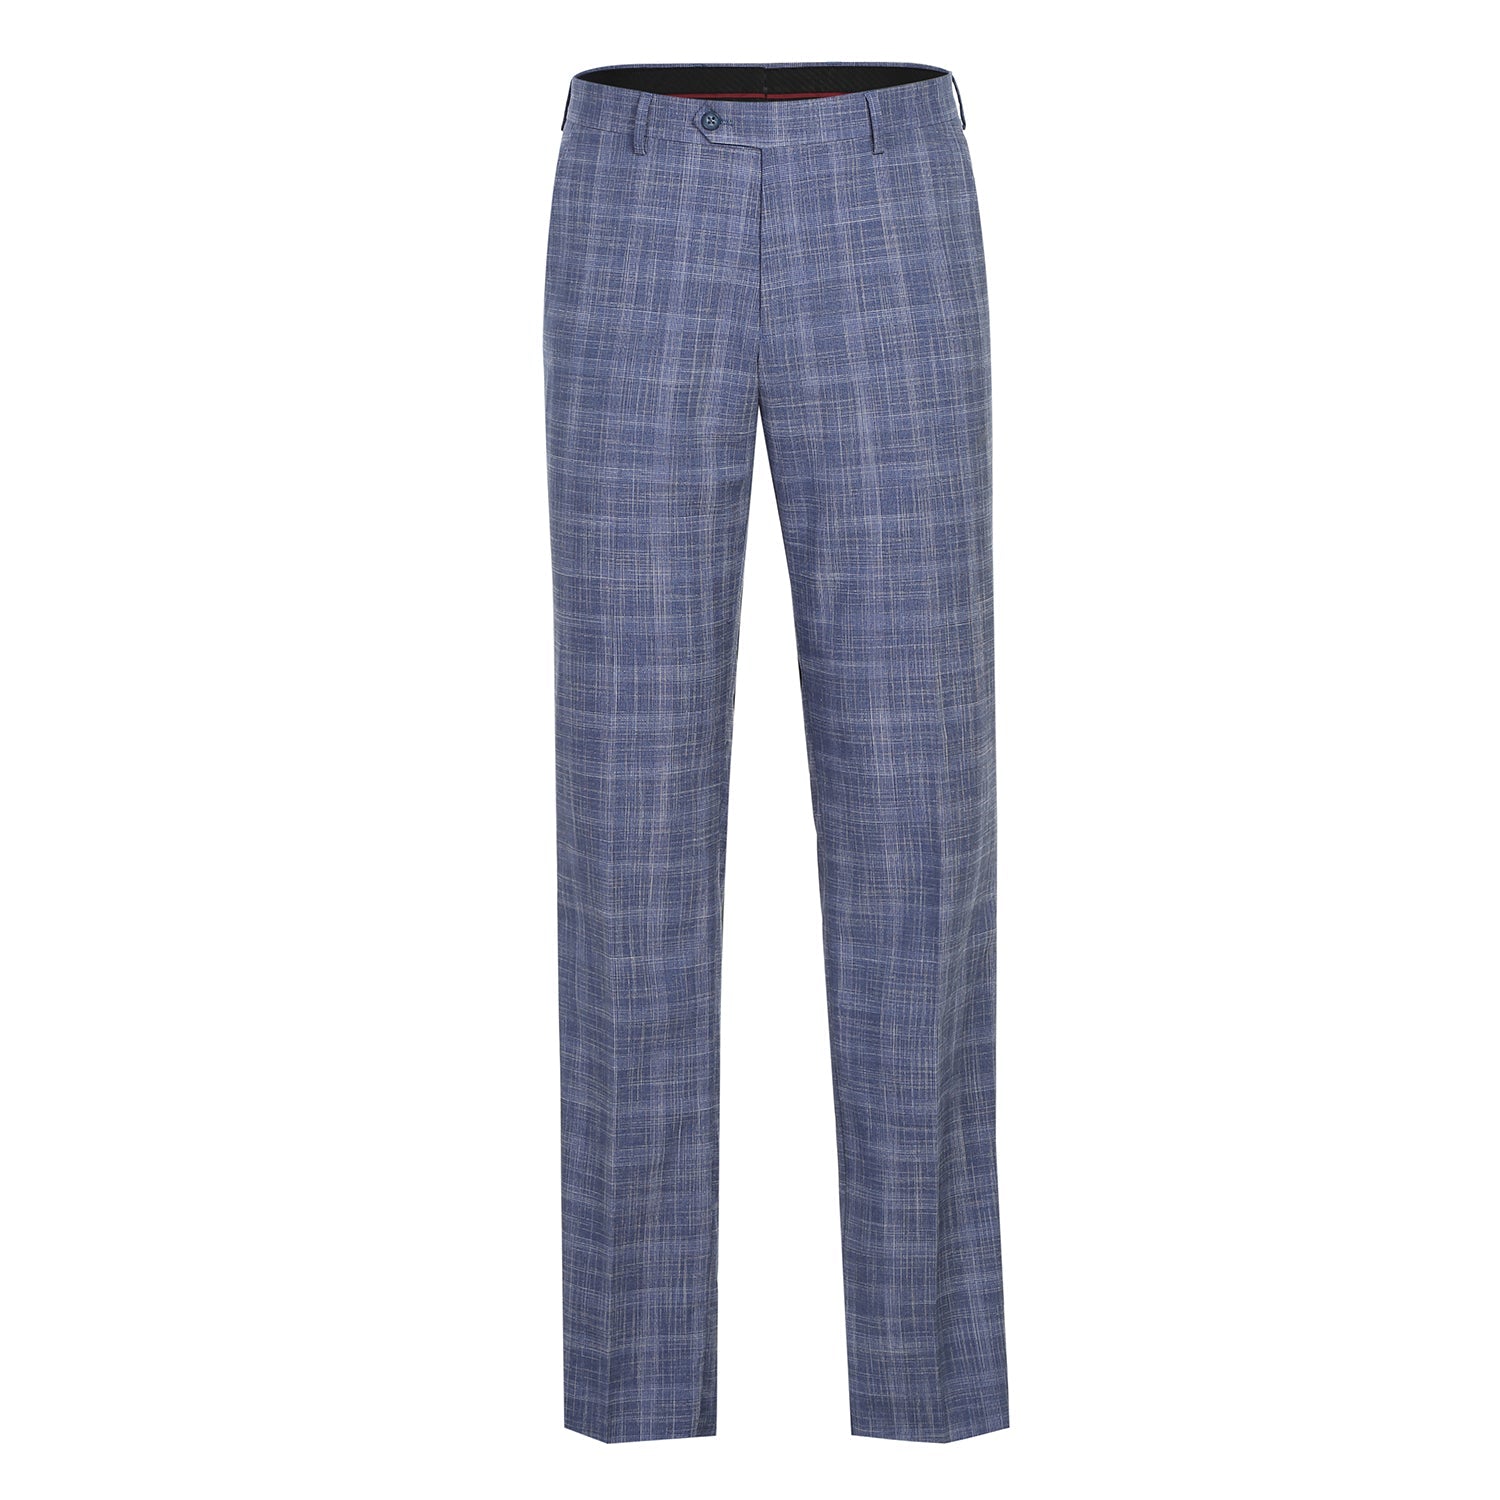 Men’s Slim Fit Checked Suits 8